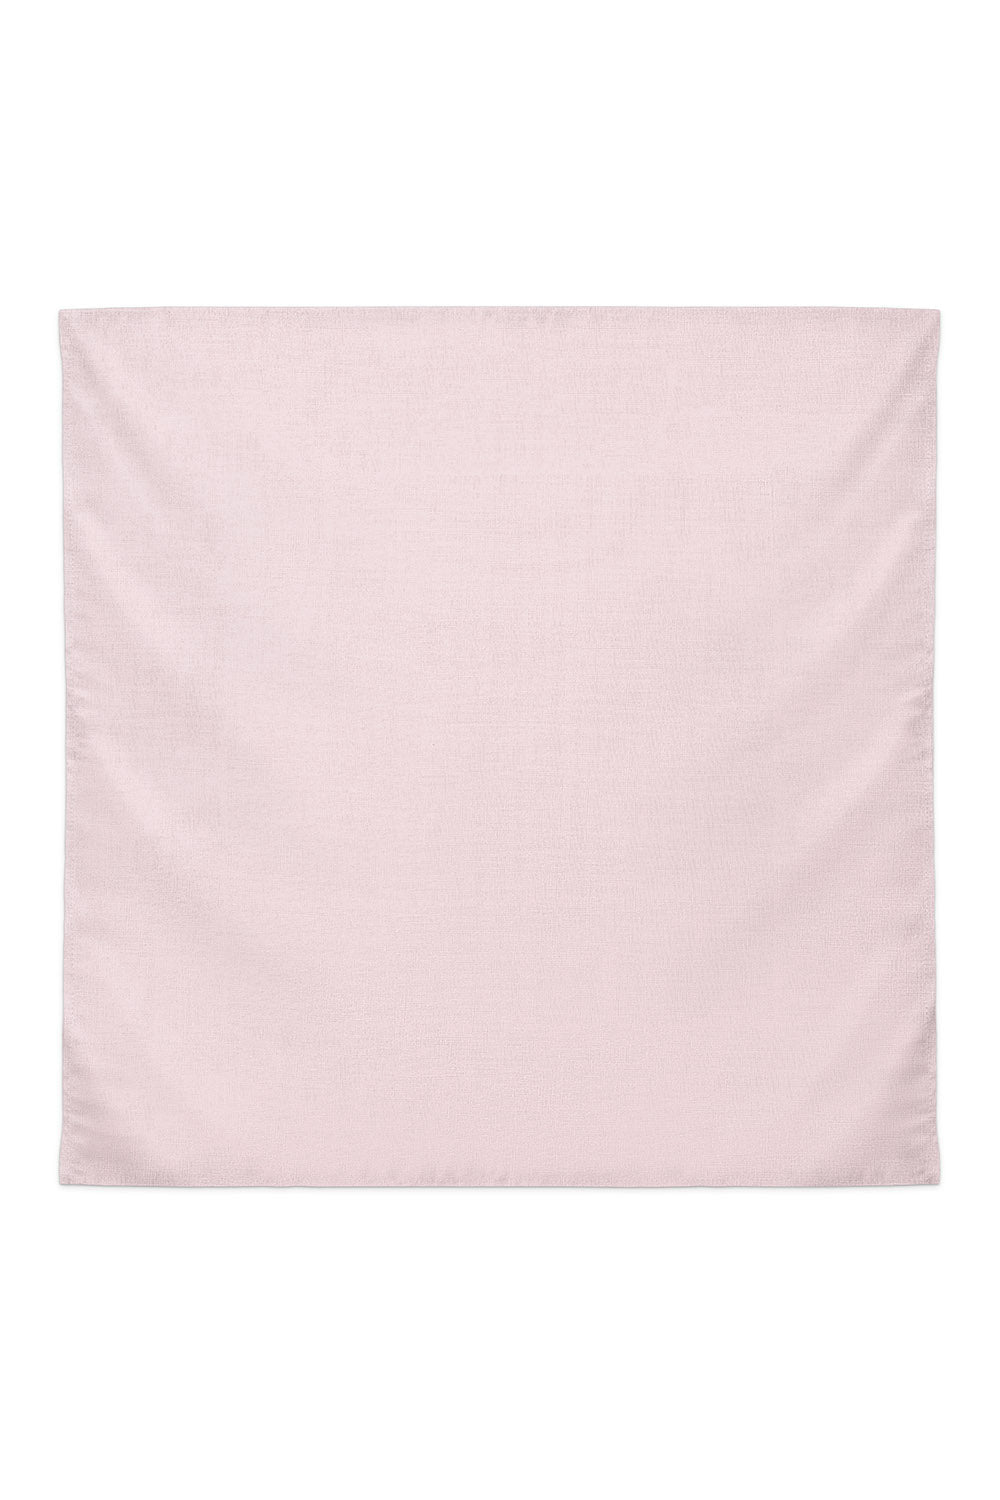 RR Basic Cotton Scarf in Light Pink